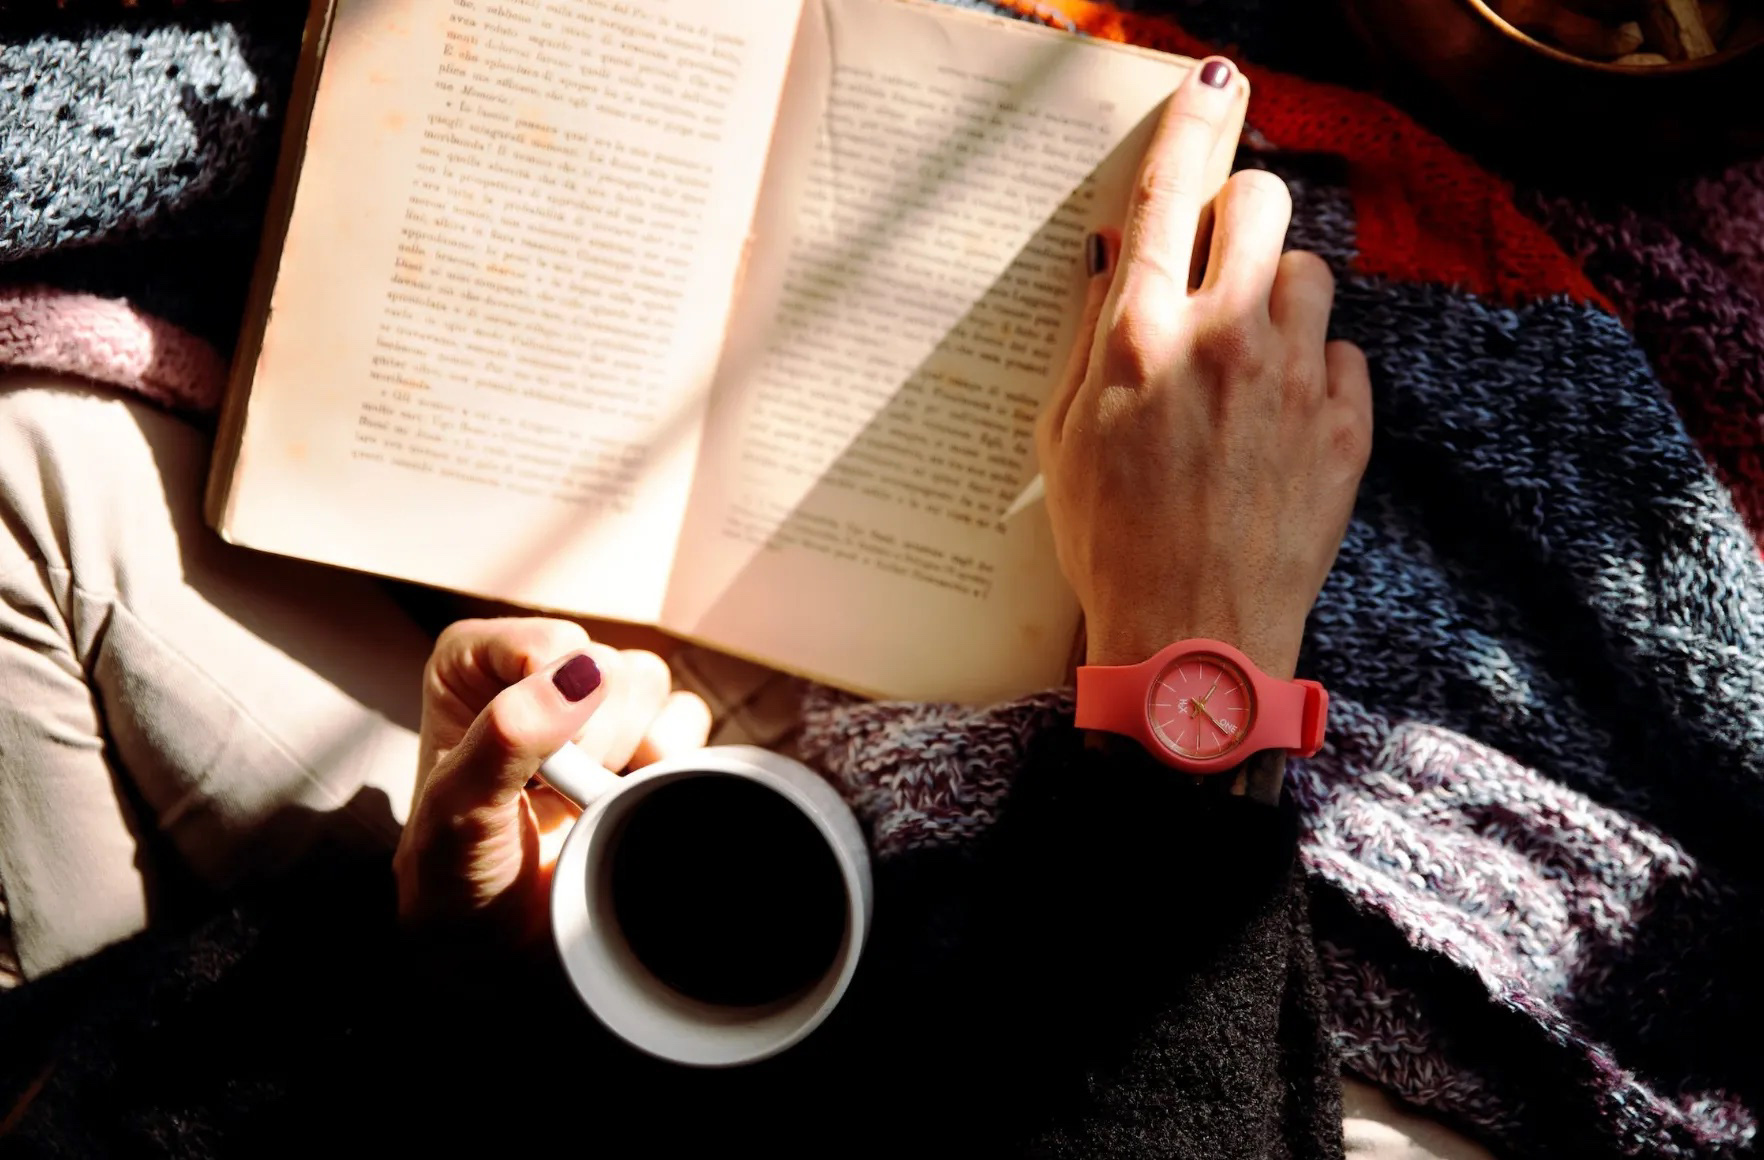 Reading a book with a coffee. Image: Pexels - Vincenzo Malagoli